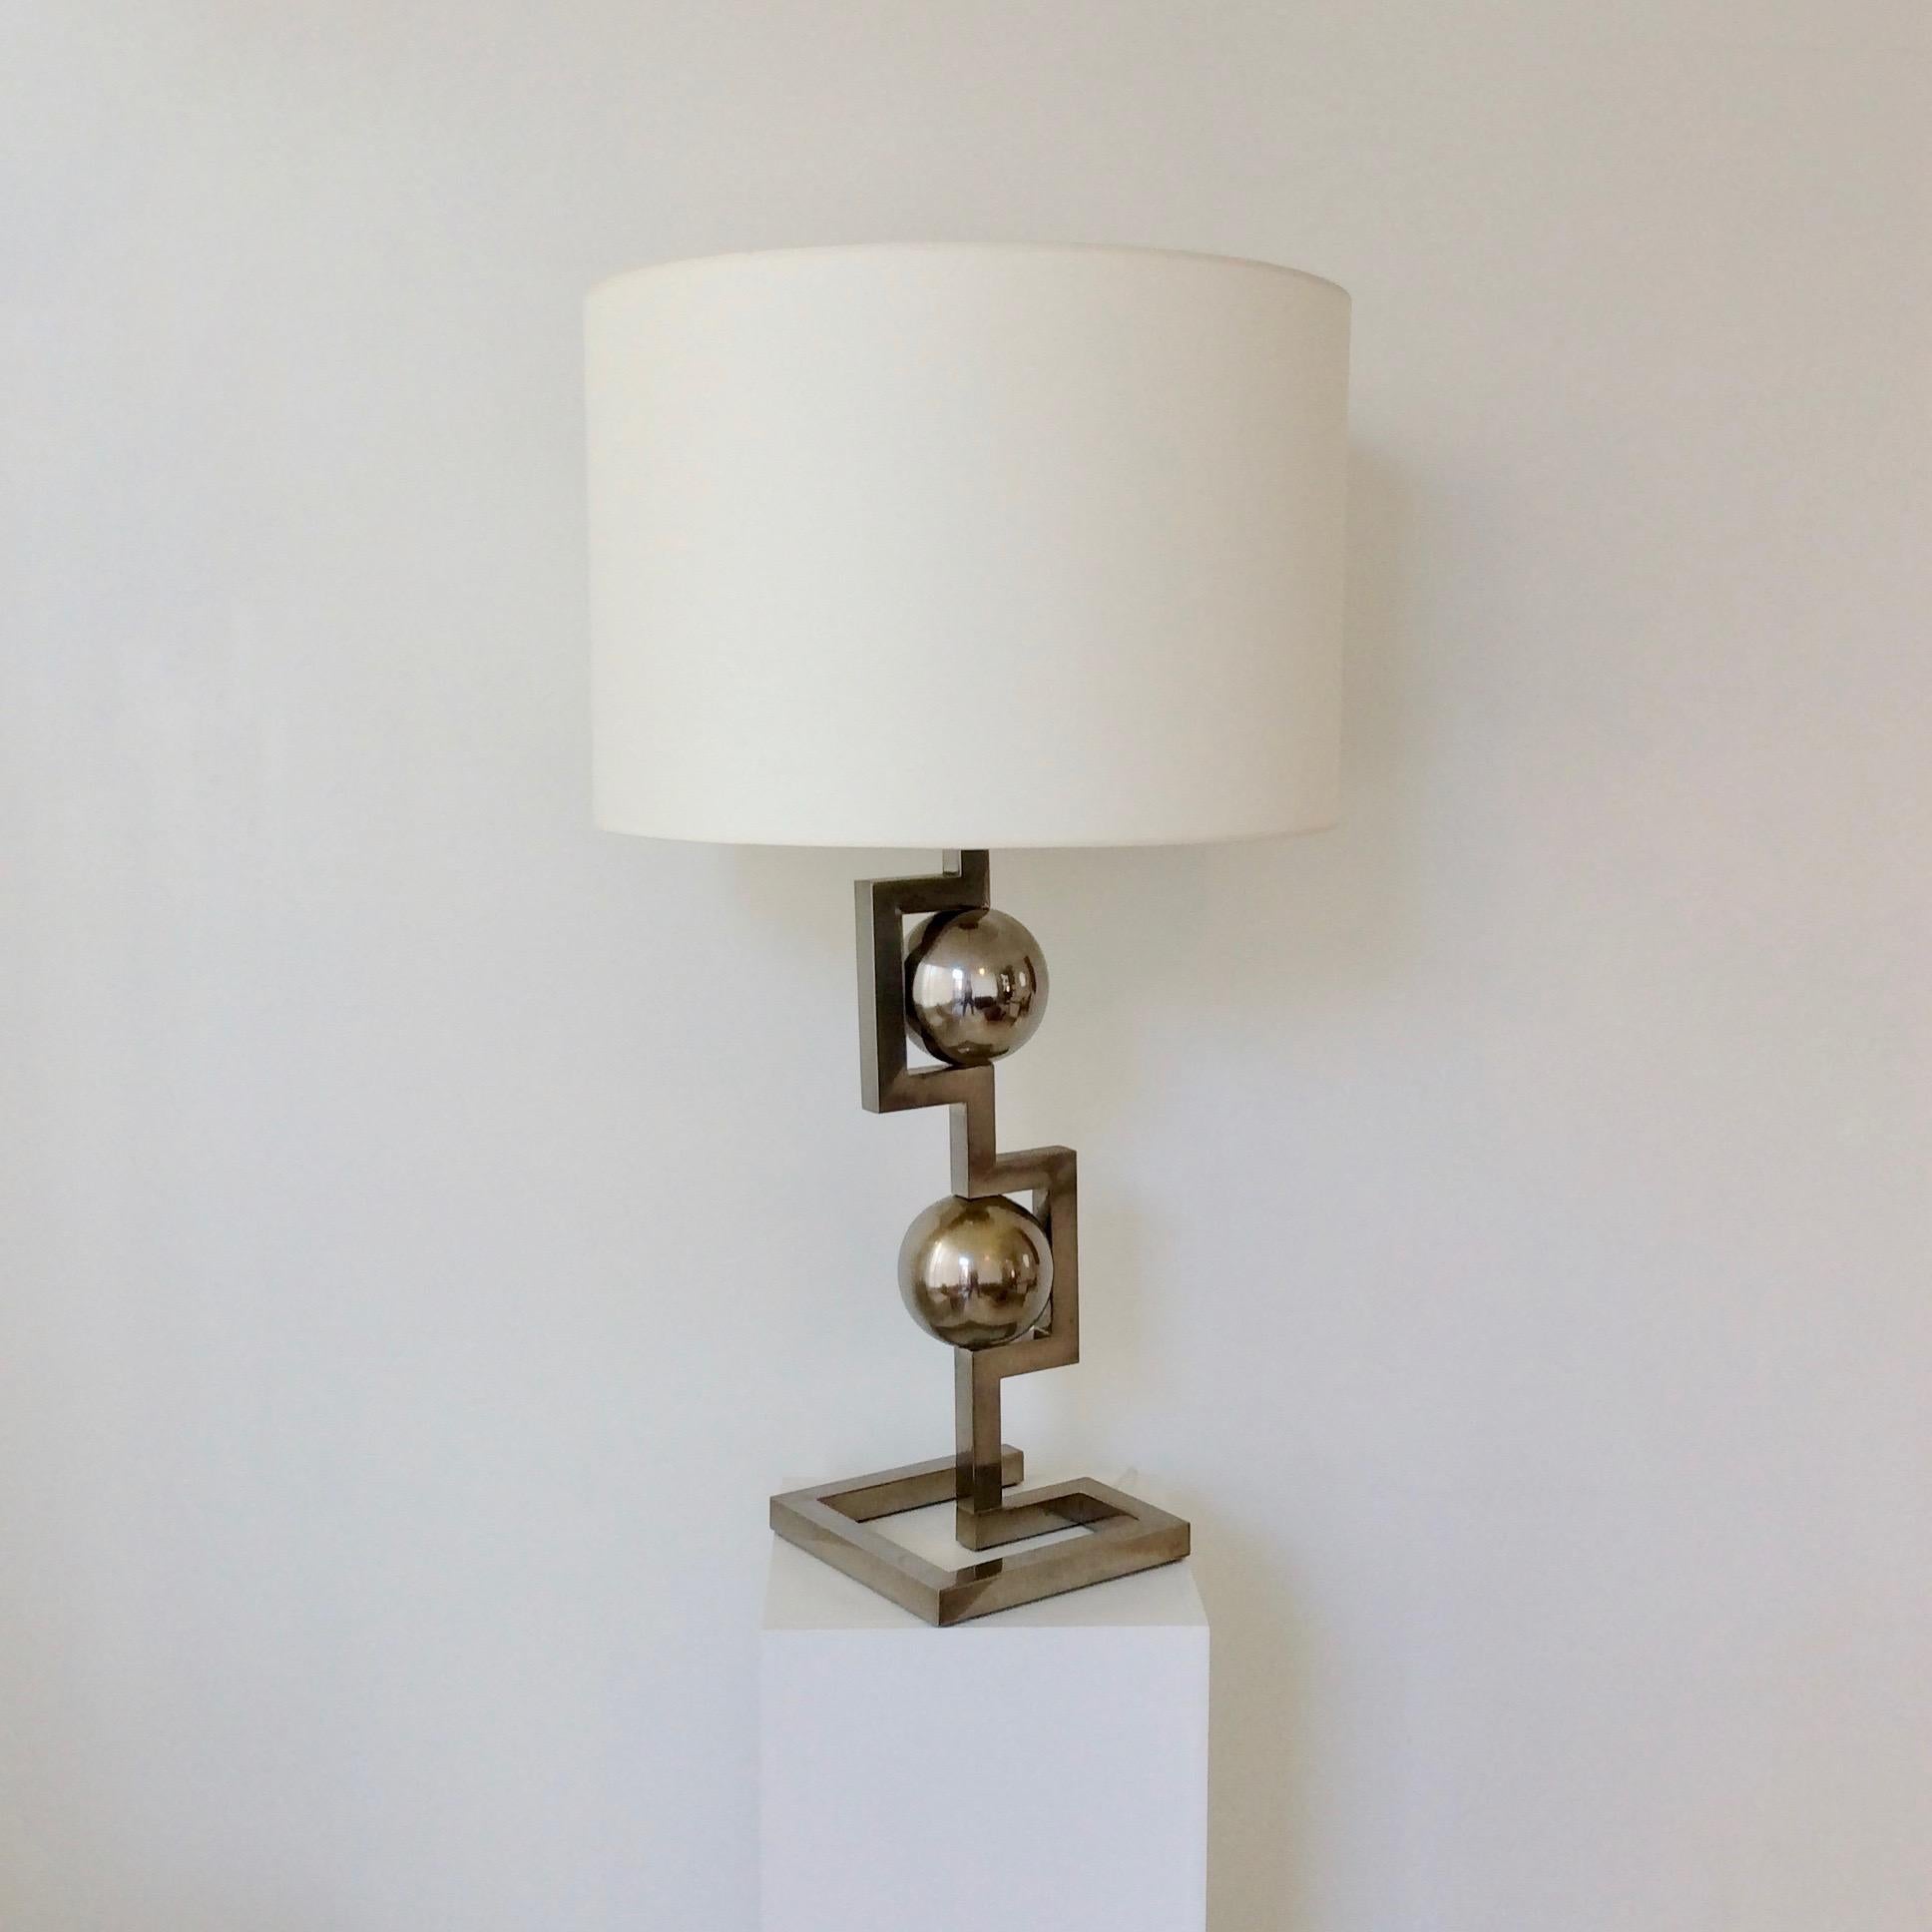 Impressive geometrical table lamp, circa 1970, Italy.
Nickelled metal. New fabric shade.
One E 27 bulb of 60 W.
Dimensions: 89 cm H, diameter of the shade: 52 cm, base: 22 x 22 cm.
Good condition.
Light wear consistent with age and use on the